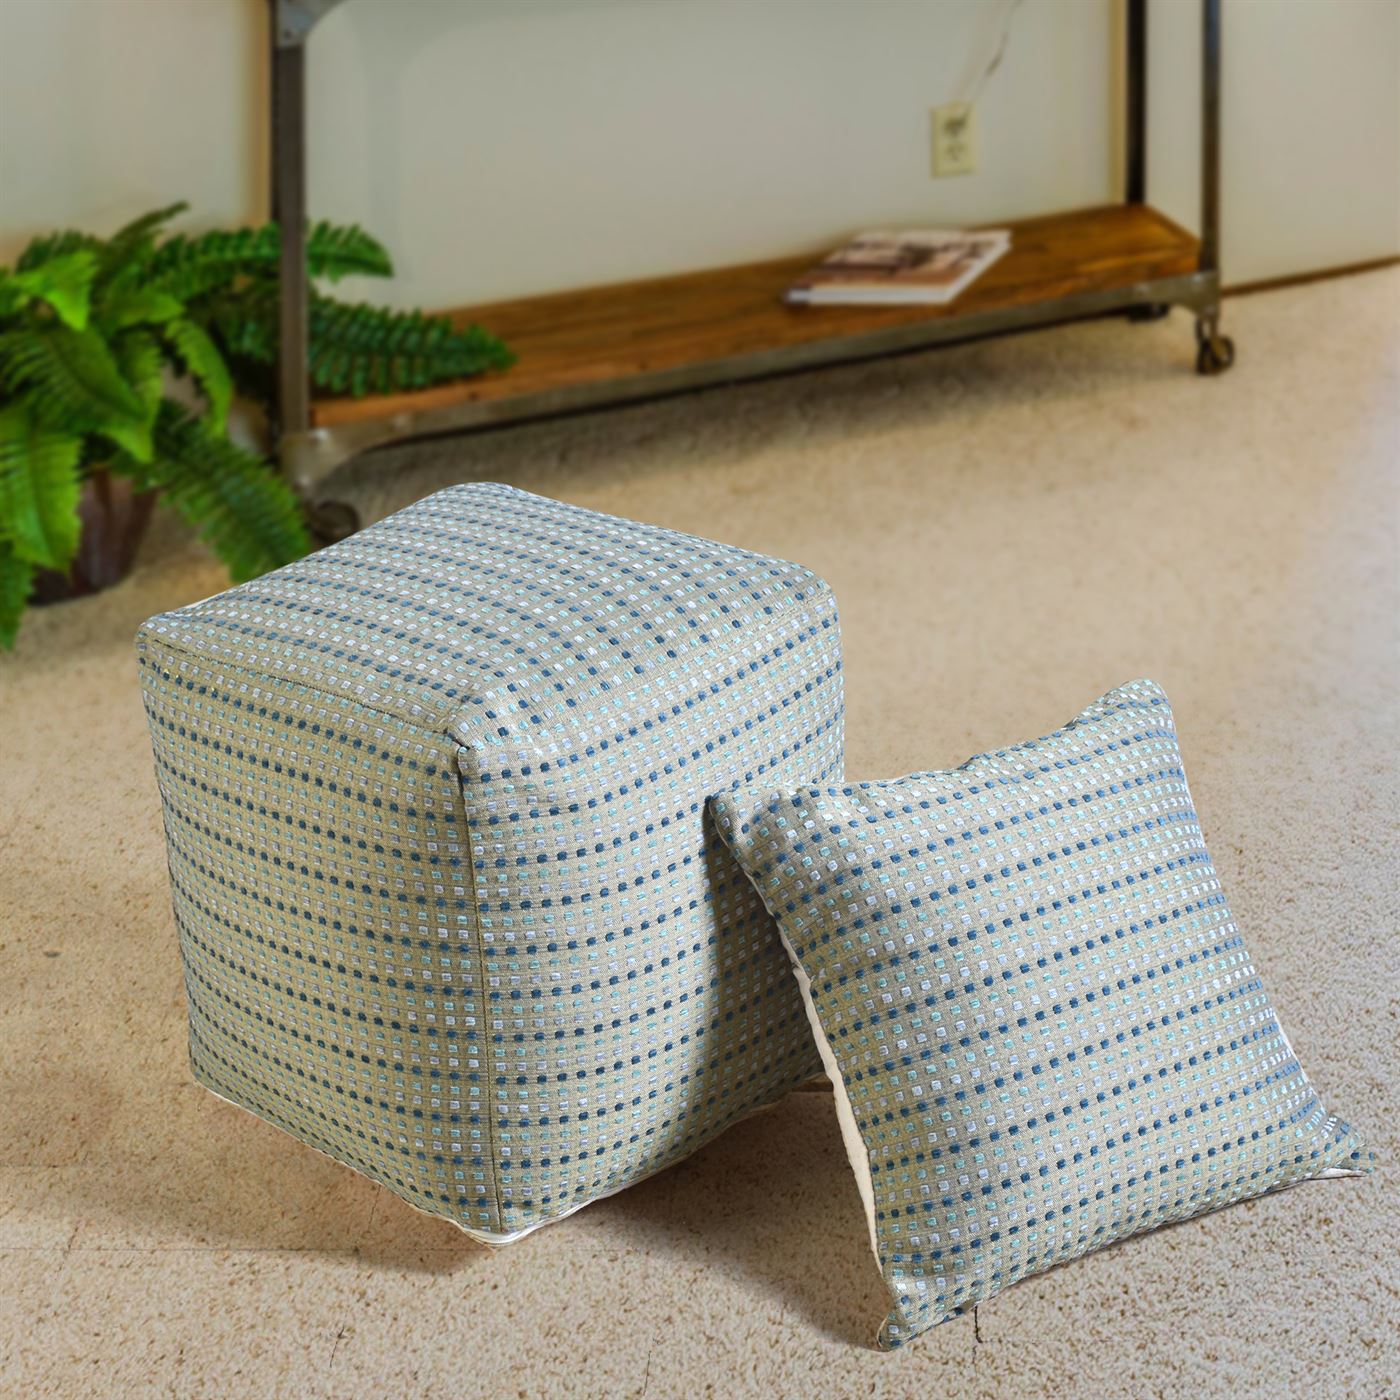 Kiato Pillow, Acrylic, Polyester, Grey, Blue, Jaquard Durry, Flat Weave